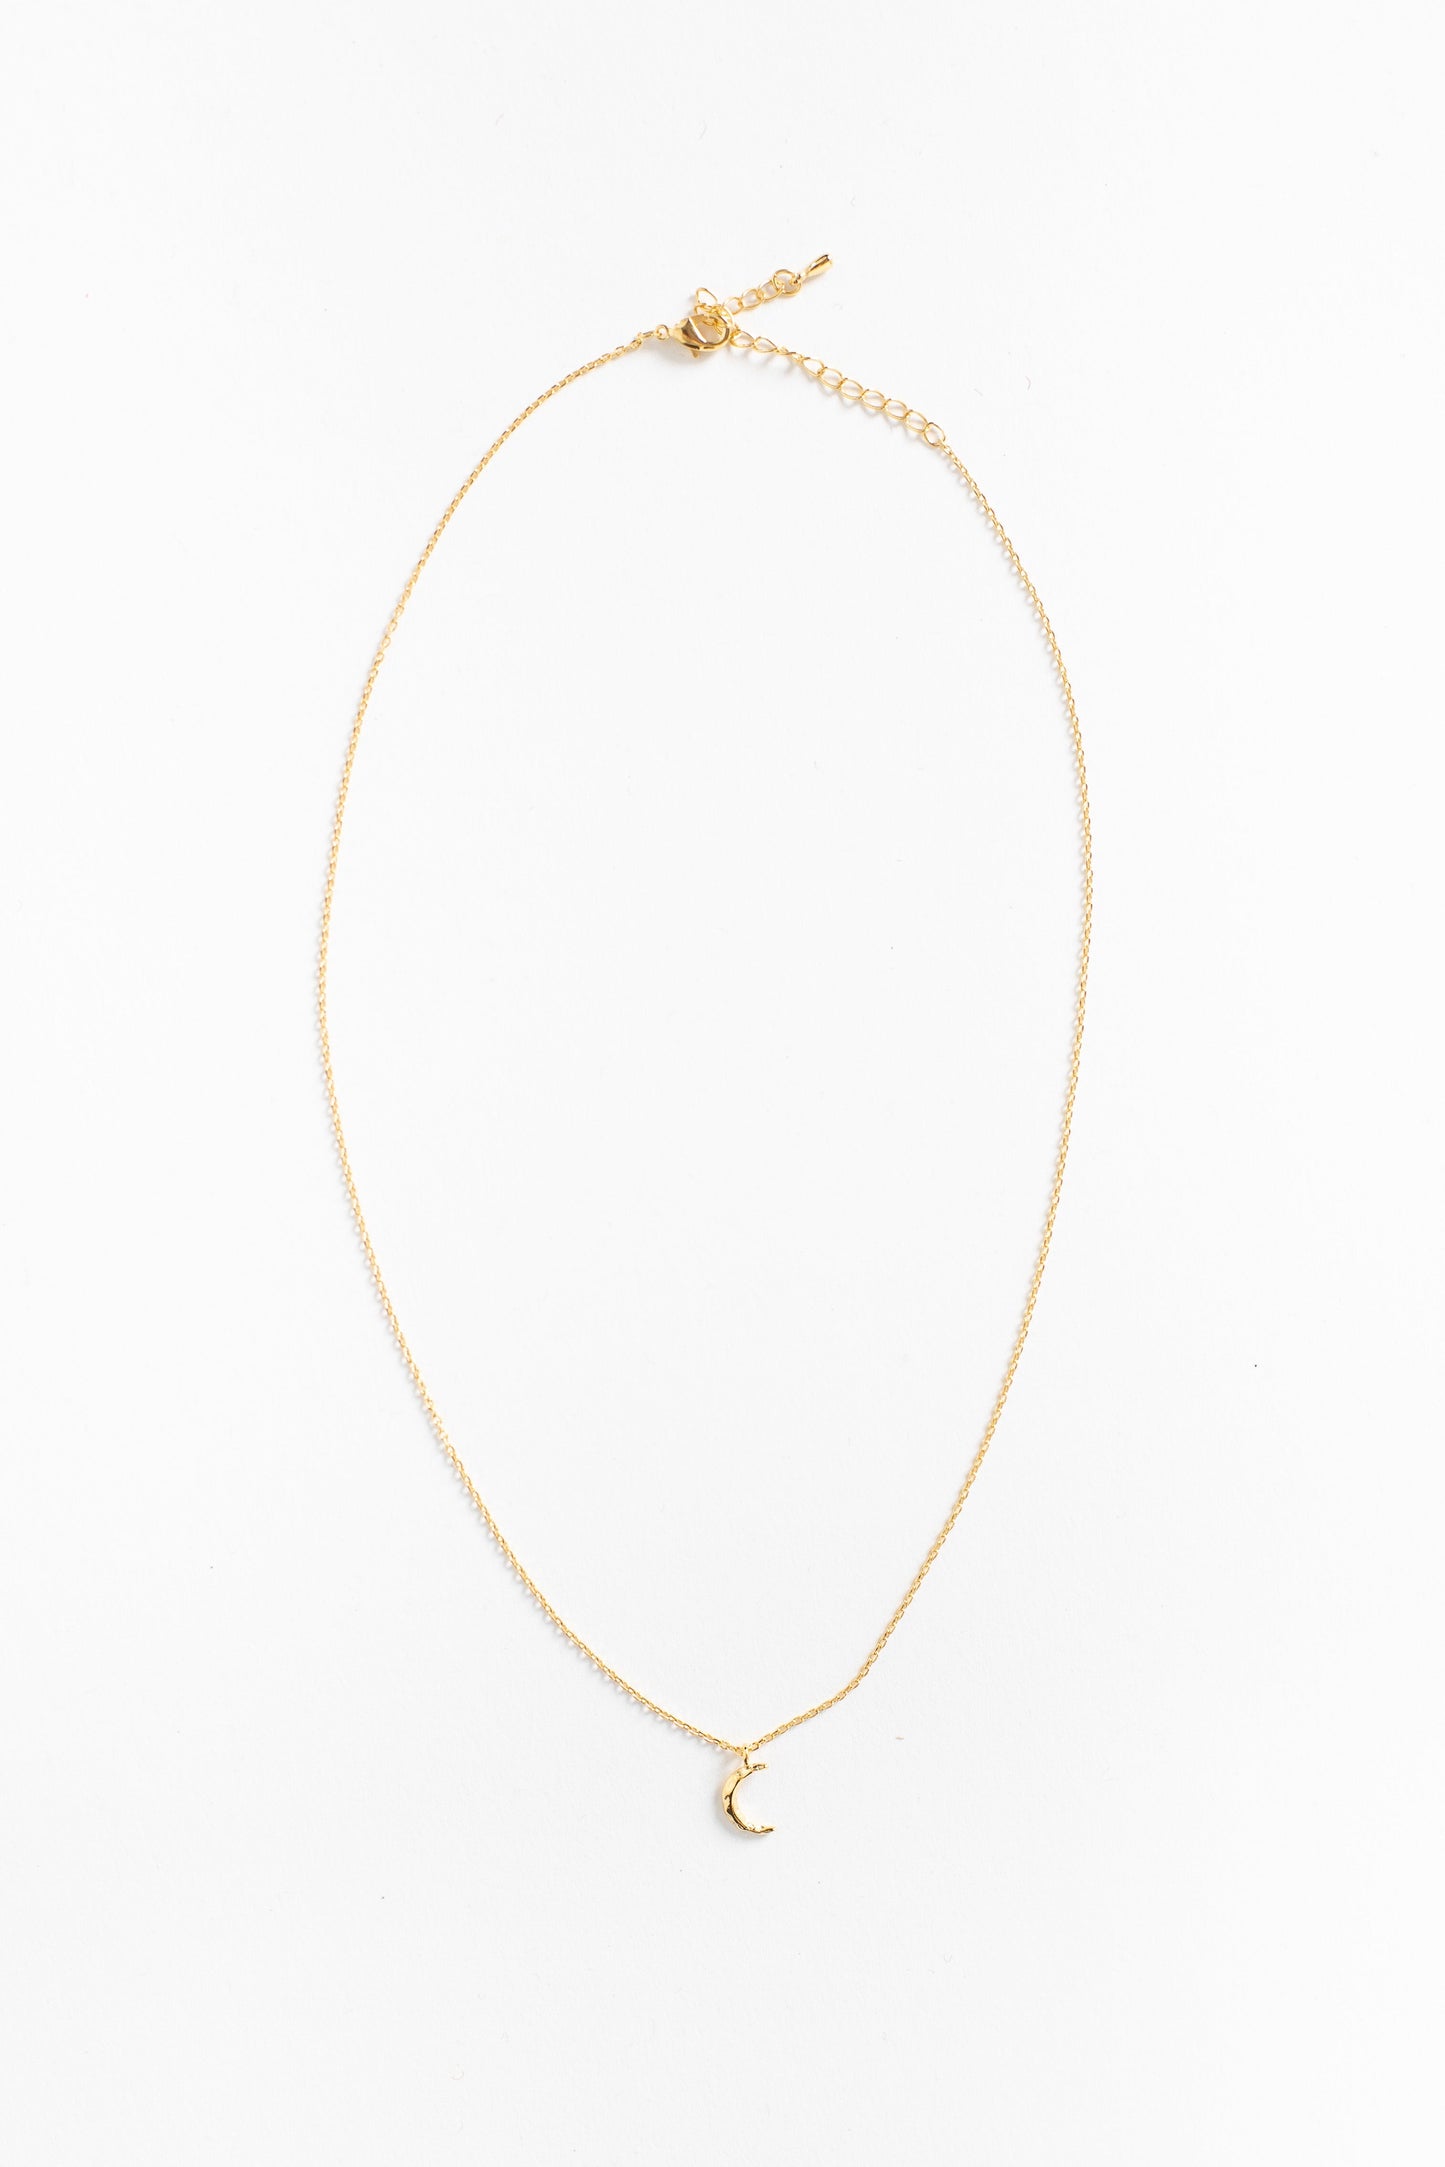 Dainty Moon Necklace WOMEN'S NECKLACE Cove 